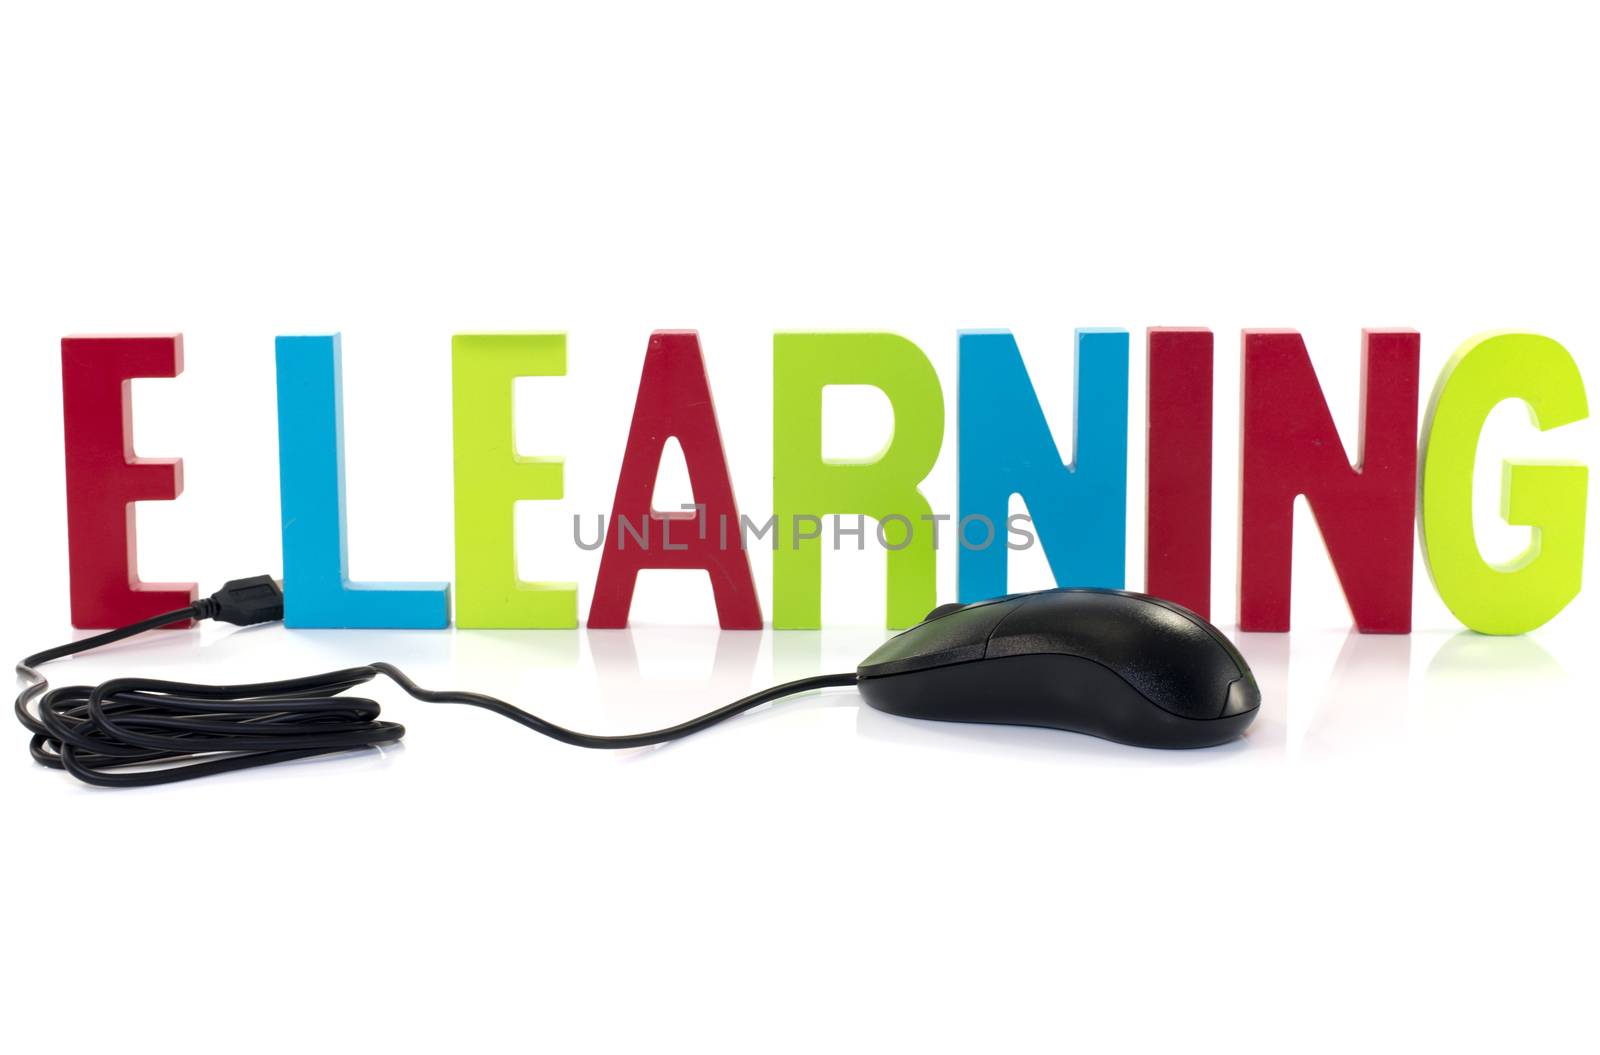 mouse with elearning by compuinfoto